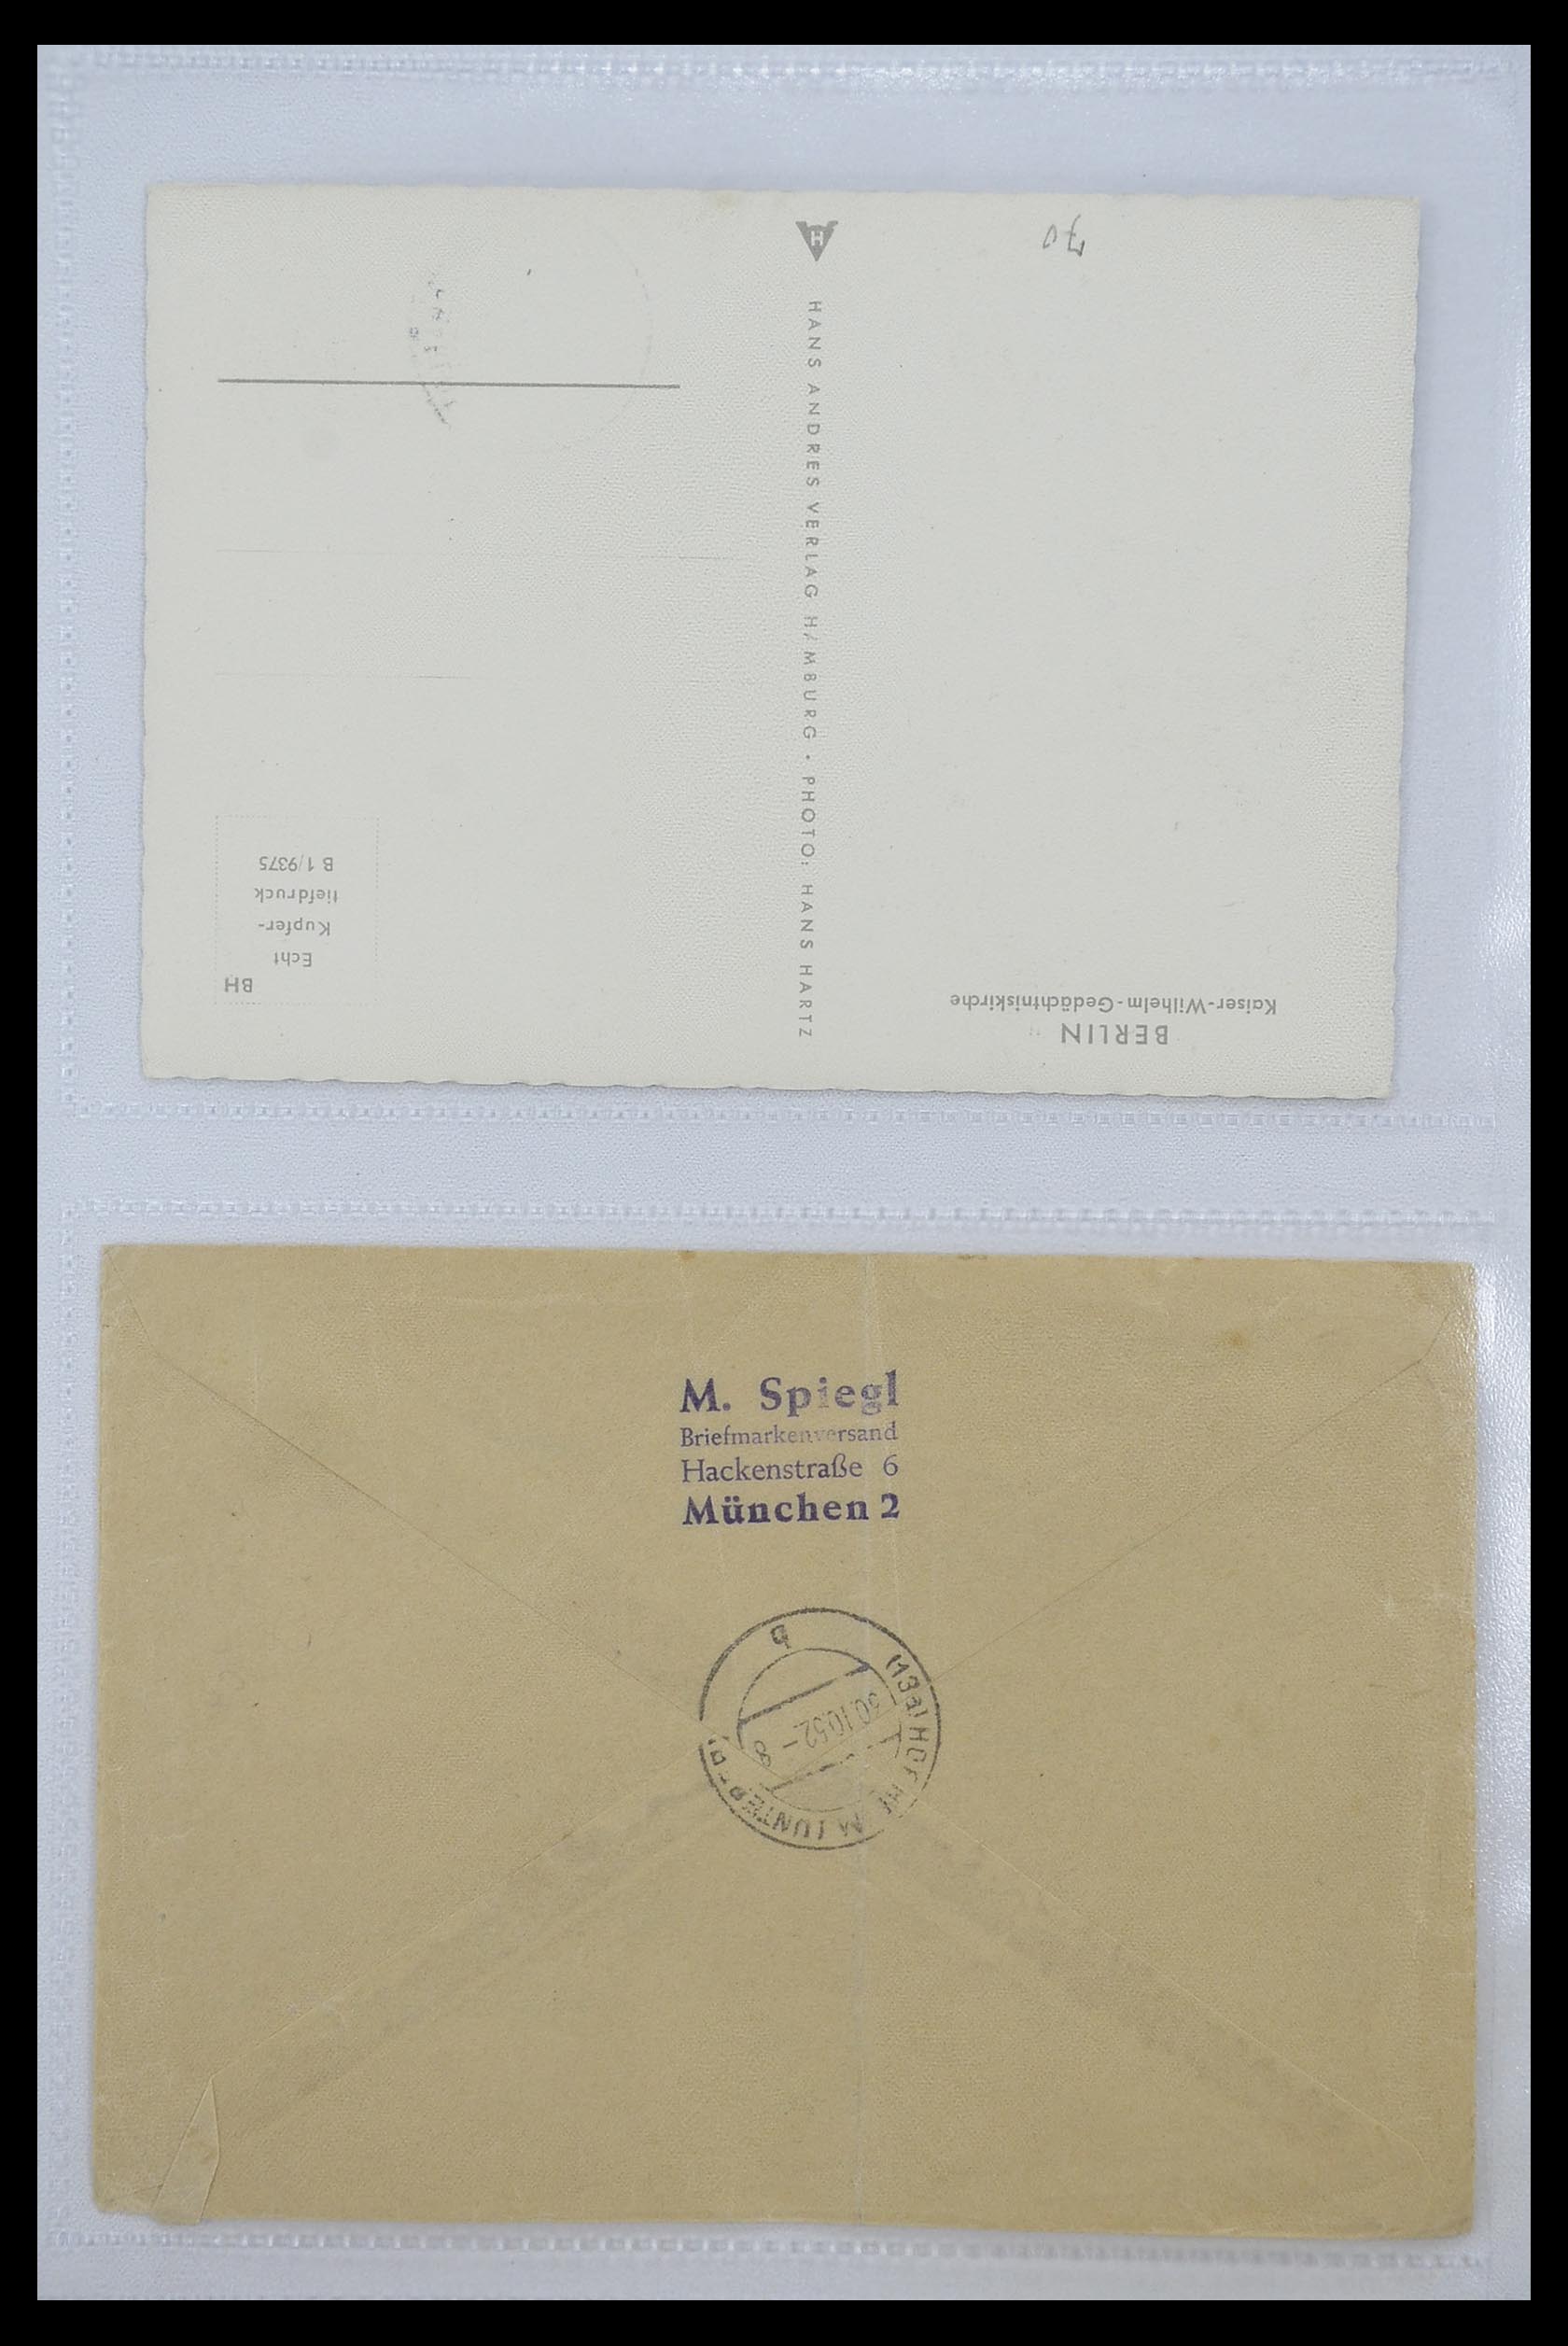 33290 072 - Stamp collection 33290 Berlin covers 1948-1957.